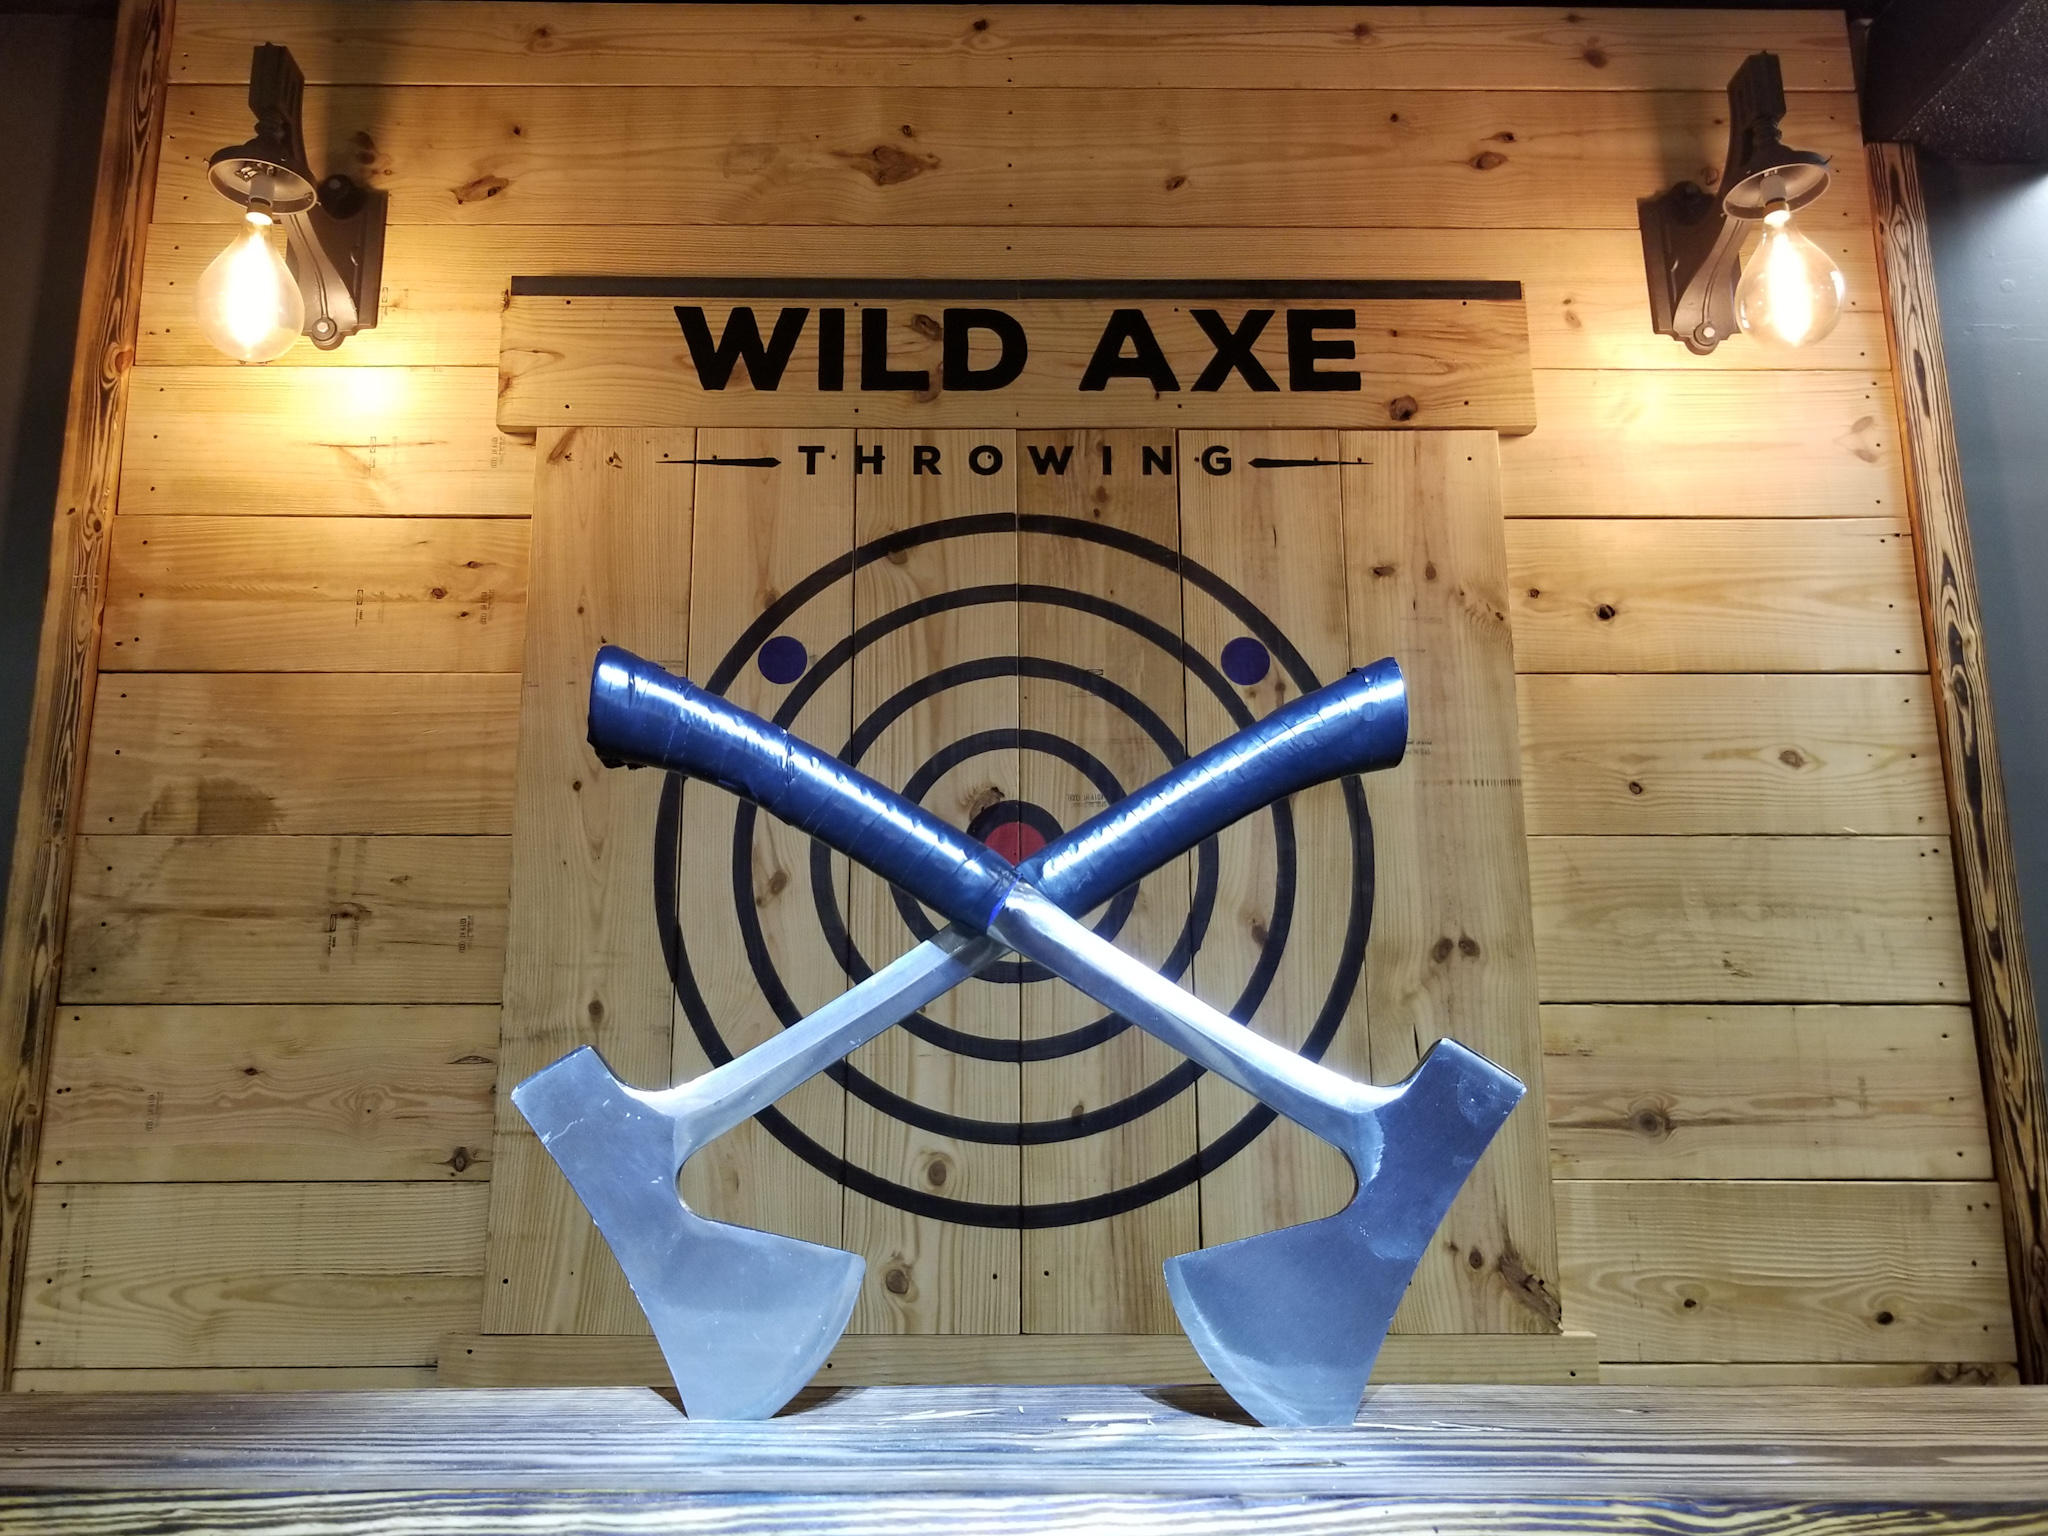 We have the largest axe throwest target in the world which doubles as our photo wall!